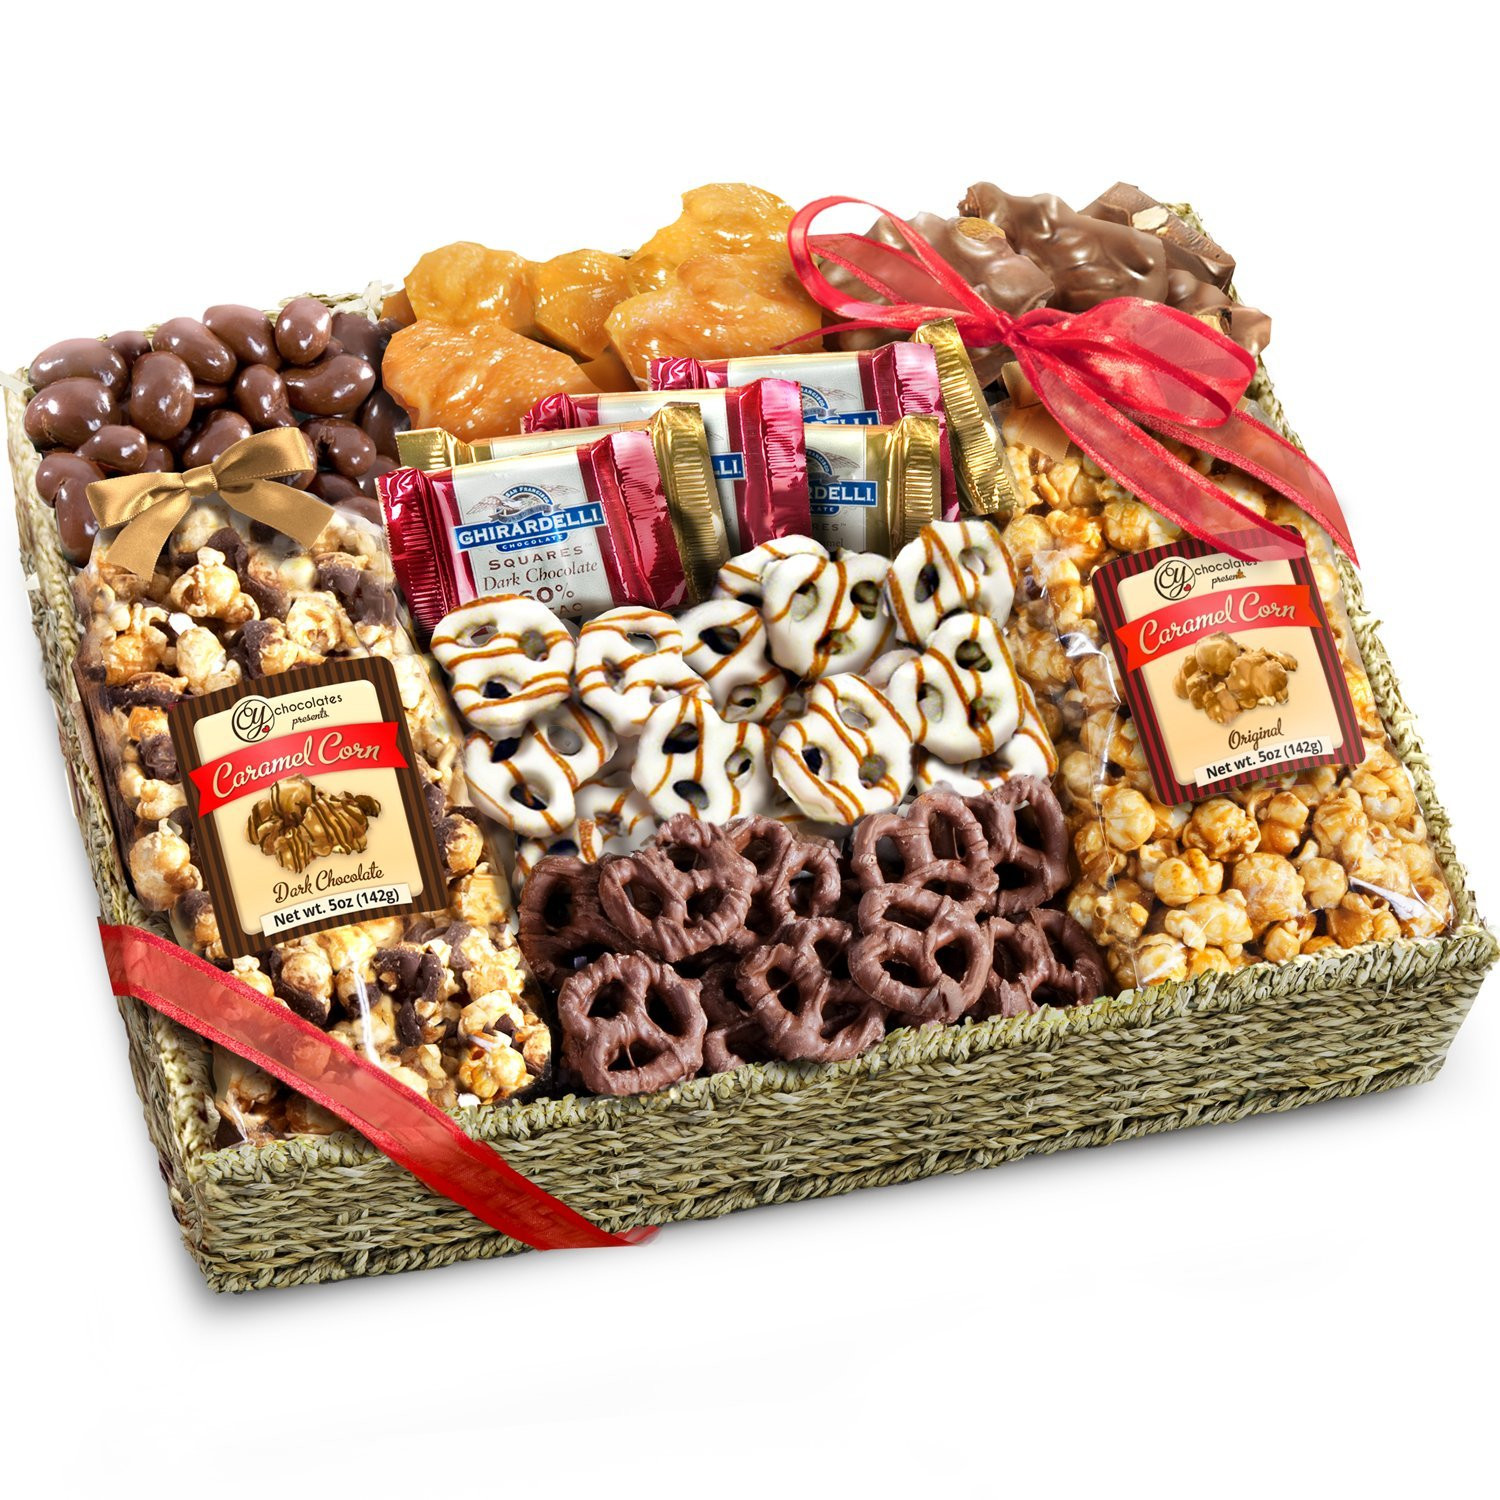 Holiday Food Gifts
 Cookie Gift Boxes & Baskets Best Holiday Treats Snacks